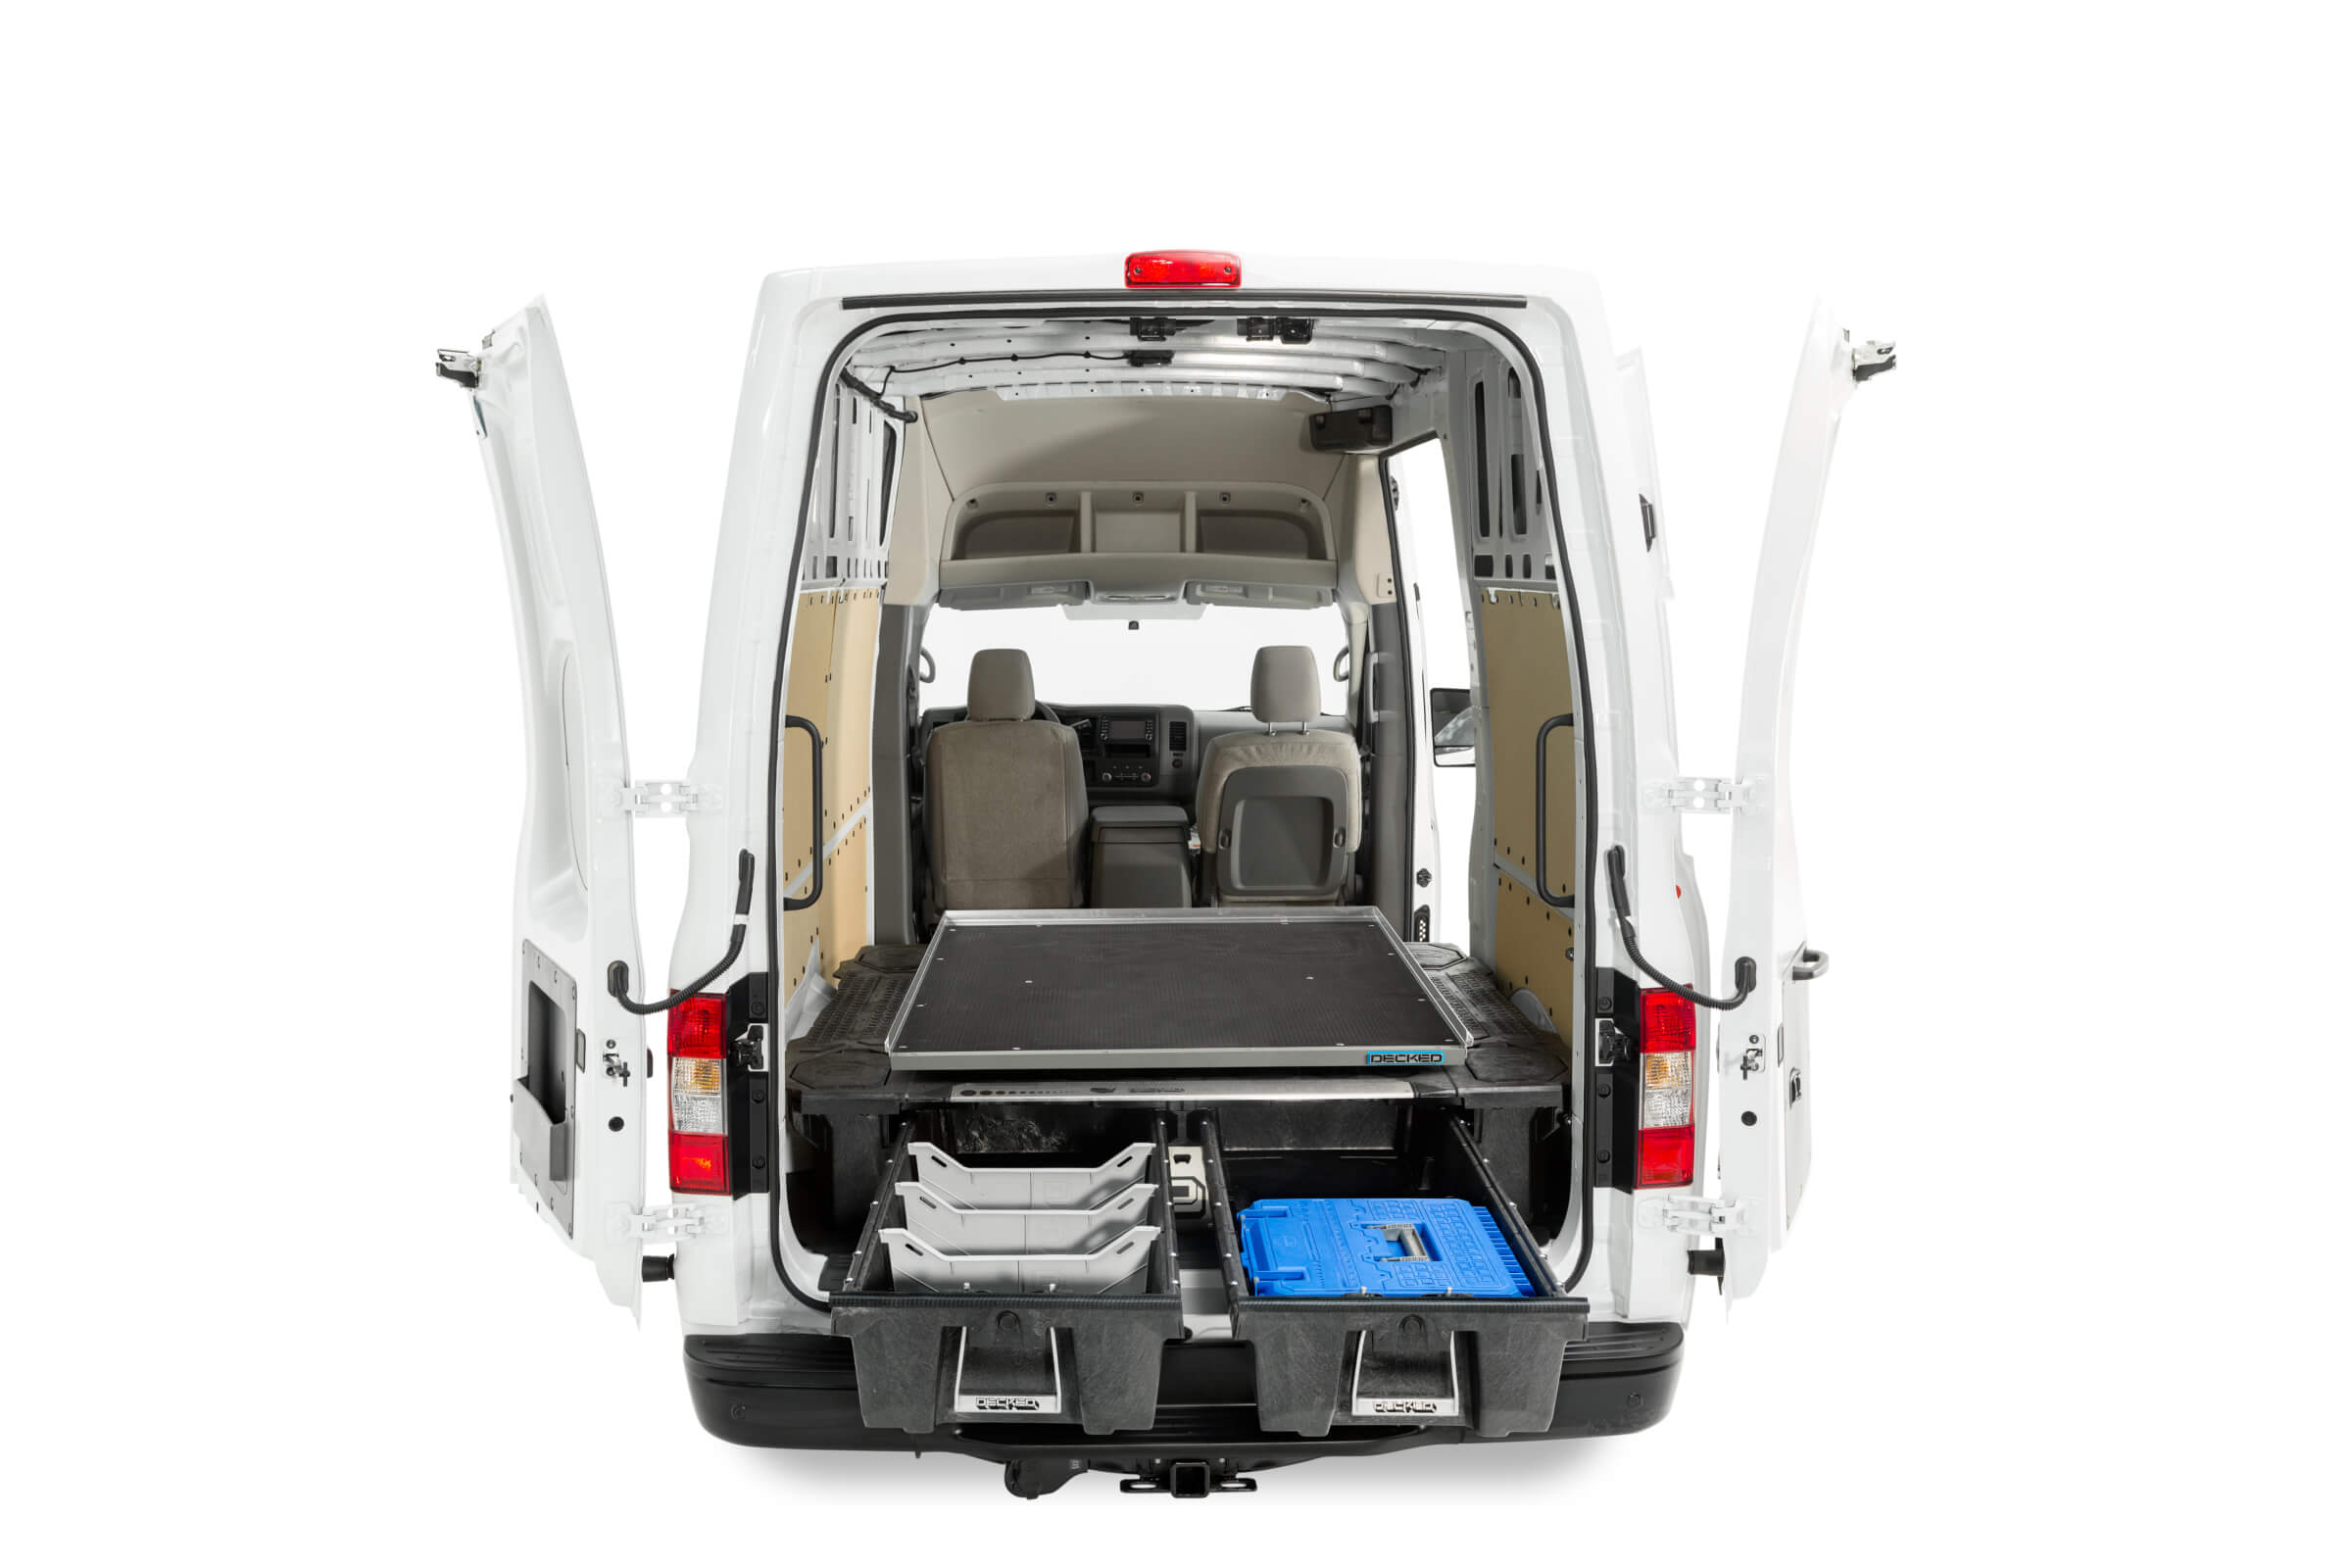 Studio image of a cargo van with CargoGlide and a drawer system